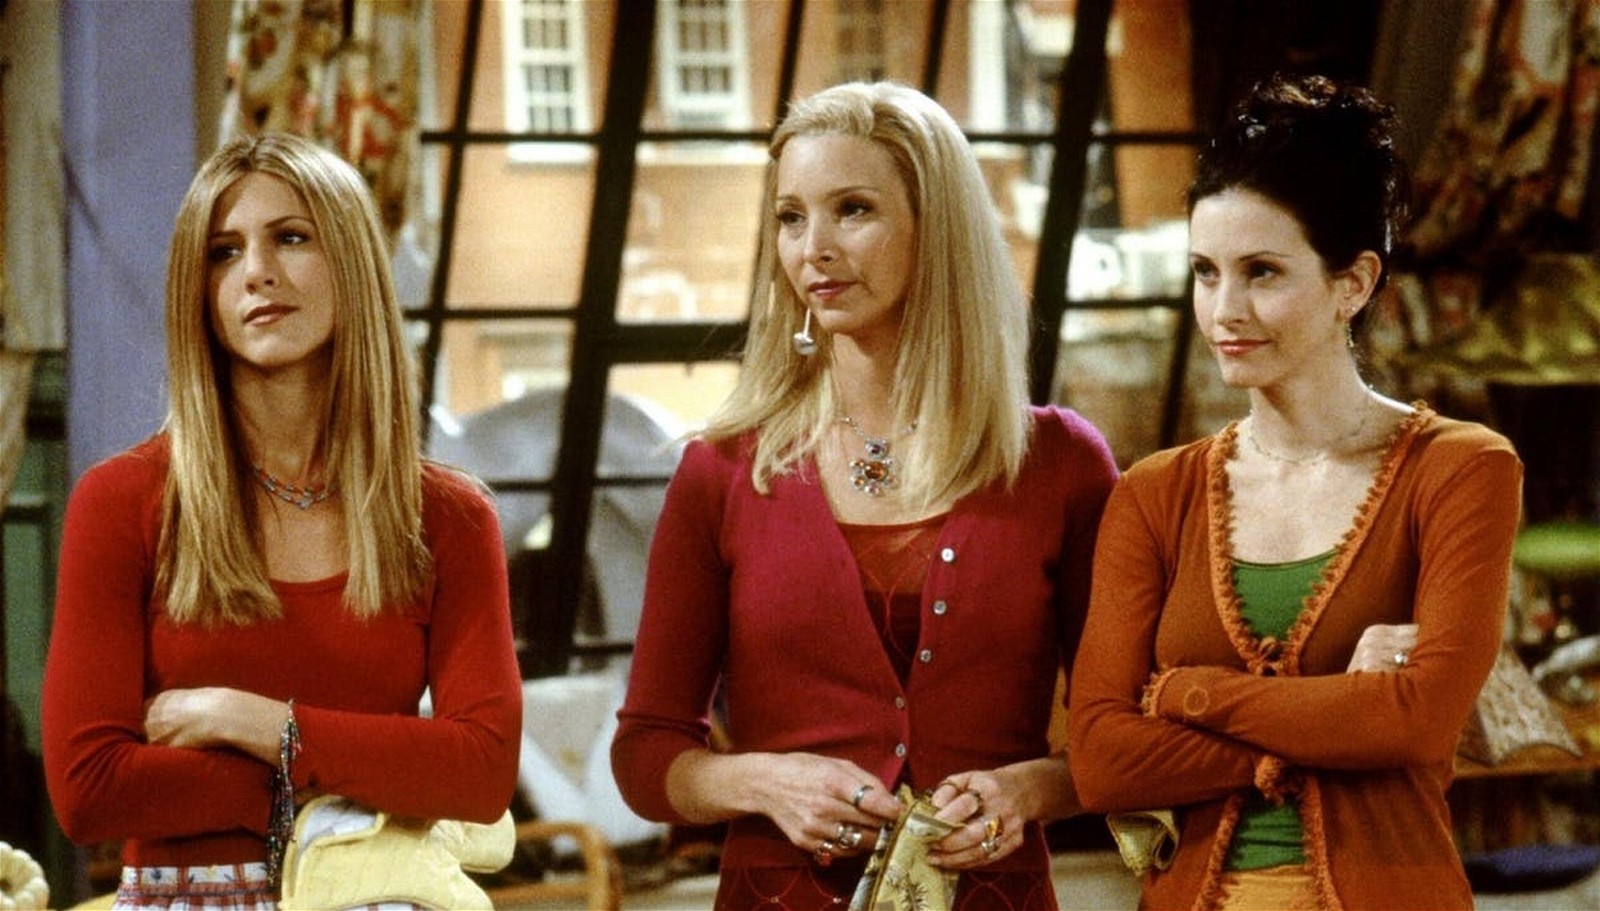 Jennifer Aniston, Lisa Kudrow, and Courtney Cox in F.R.I.E.N.D.S